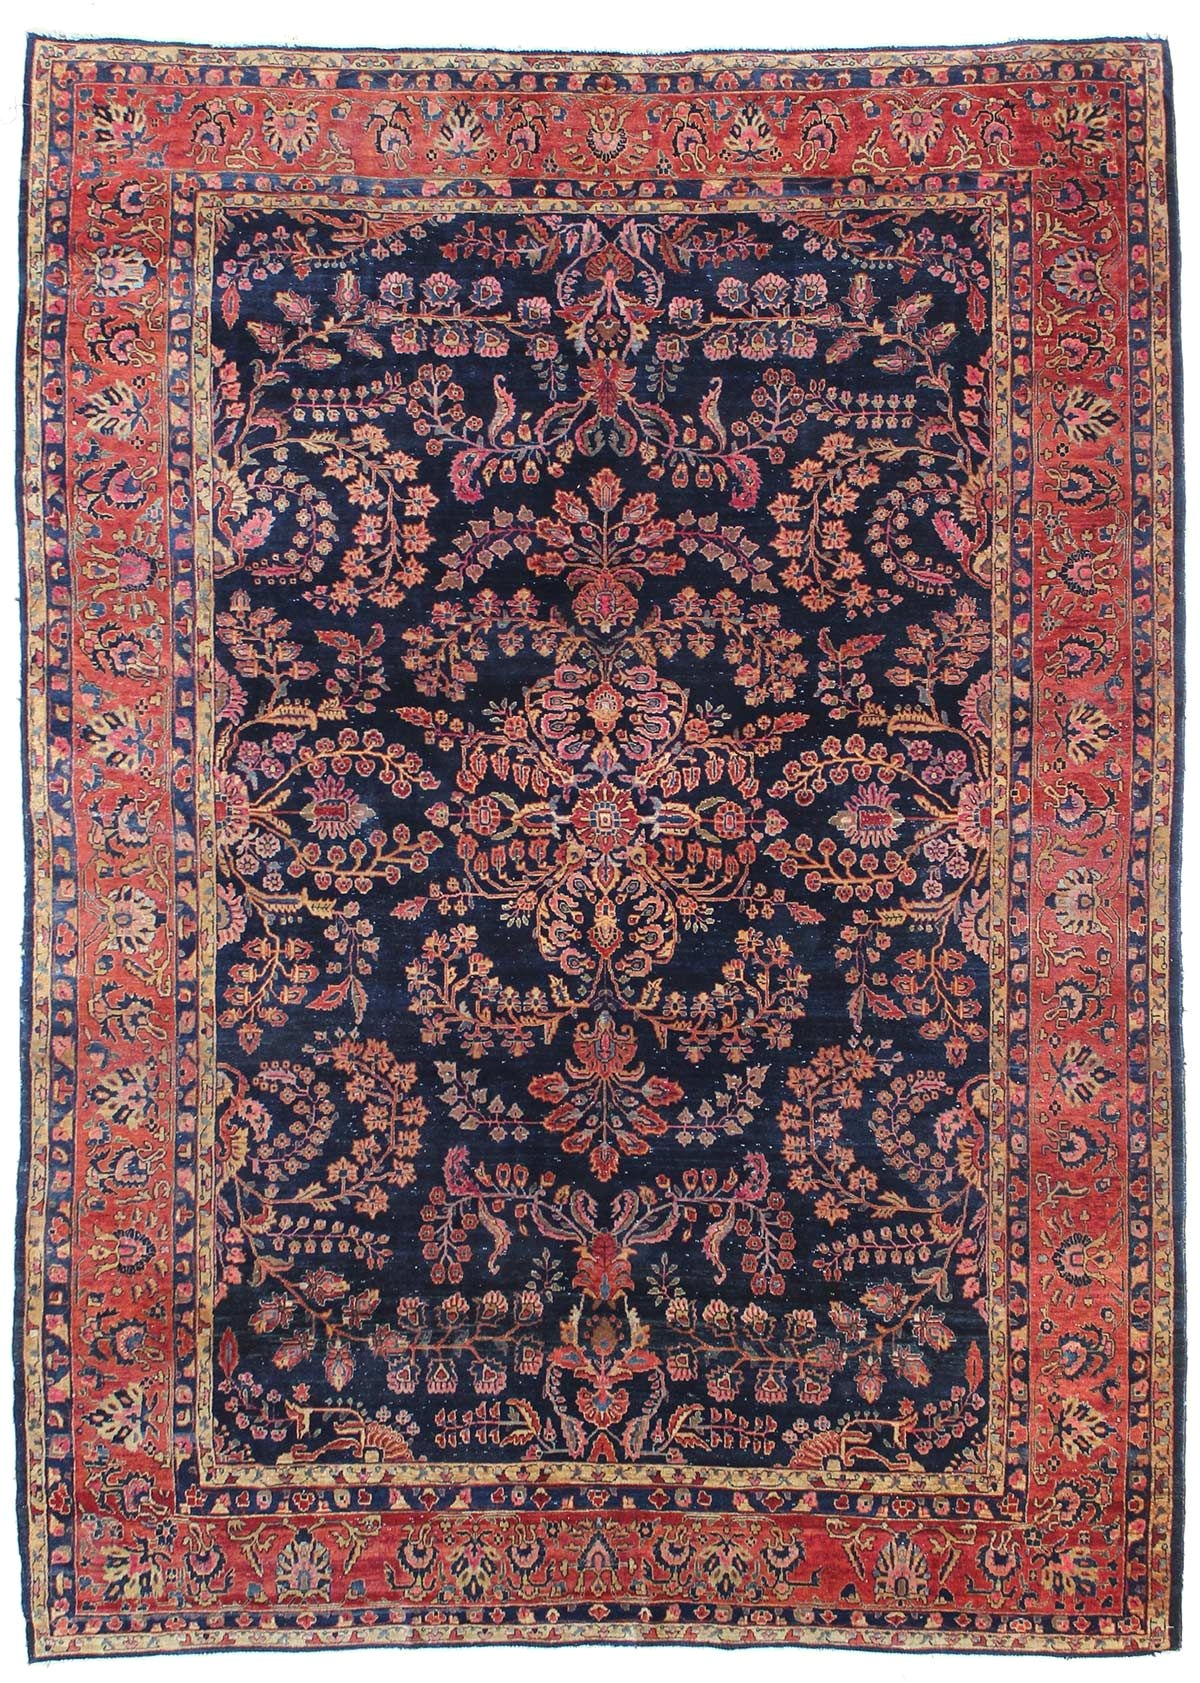 antique sarouk rugs gallery antique sarouk rug hand knotted in persia size